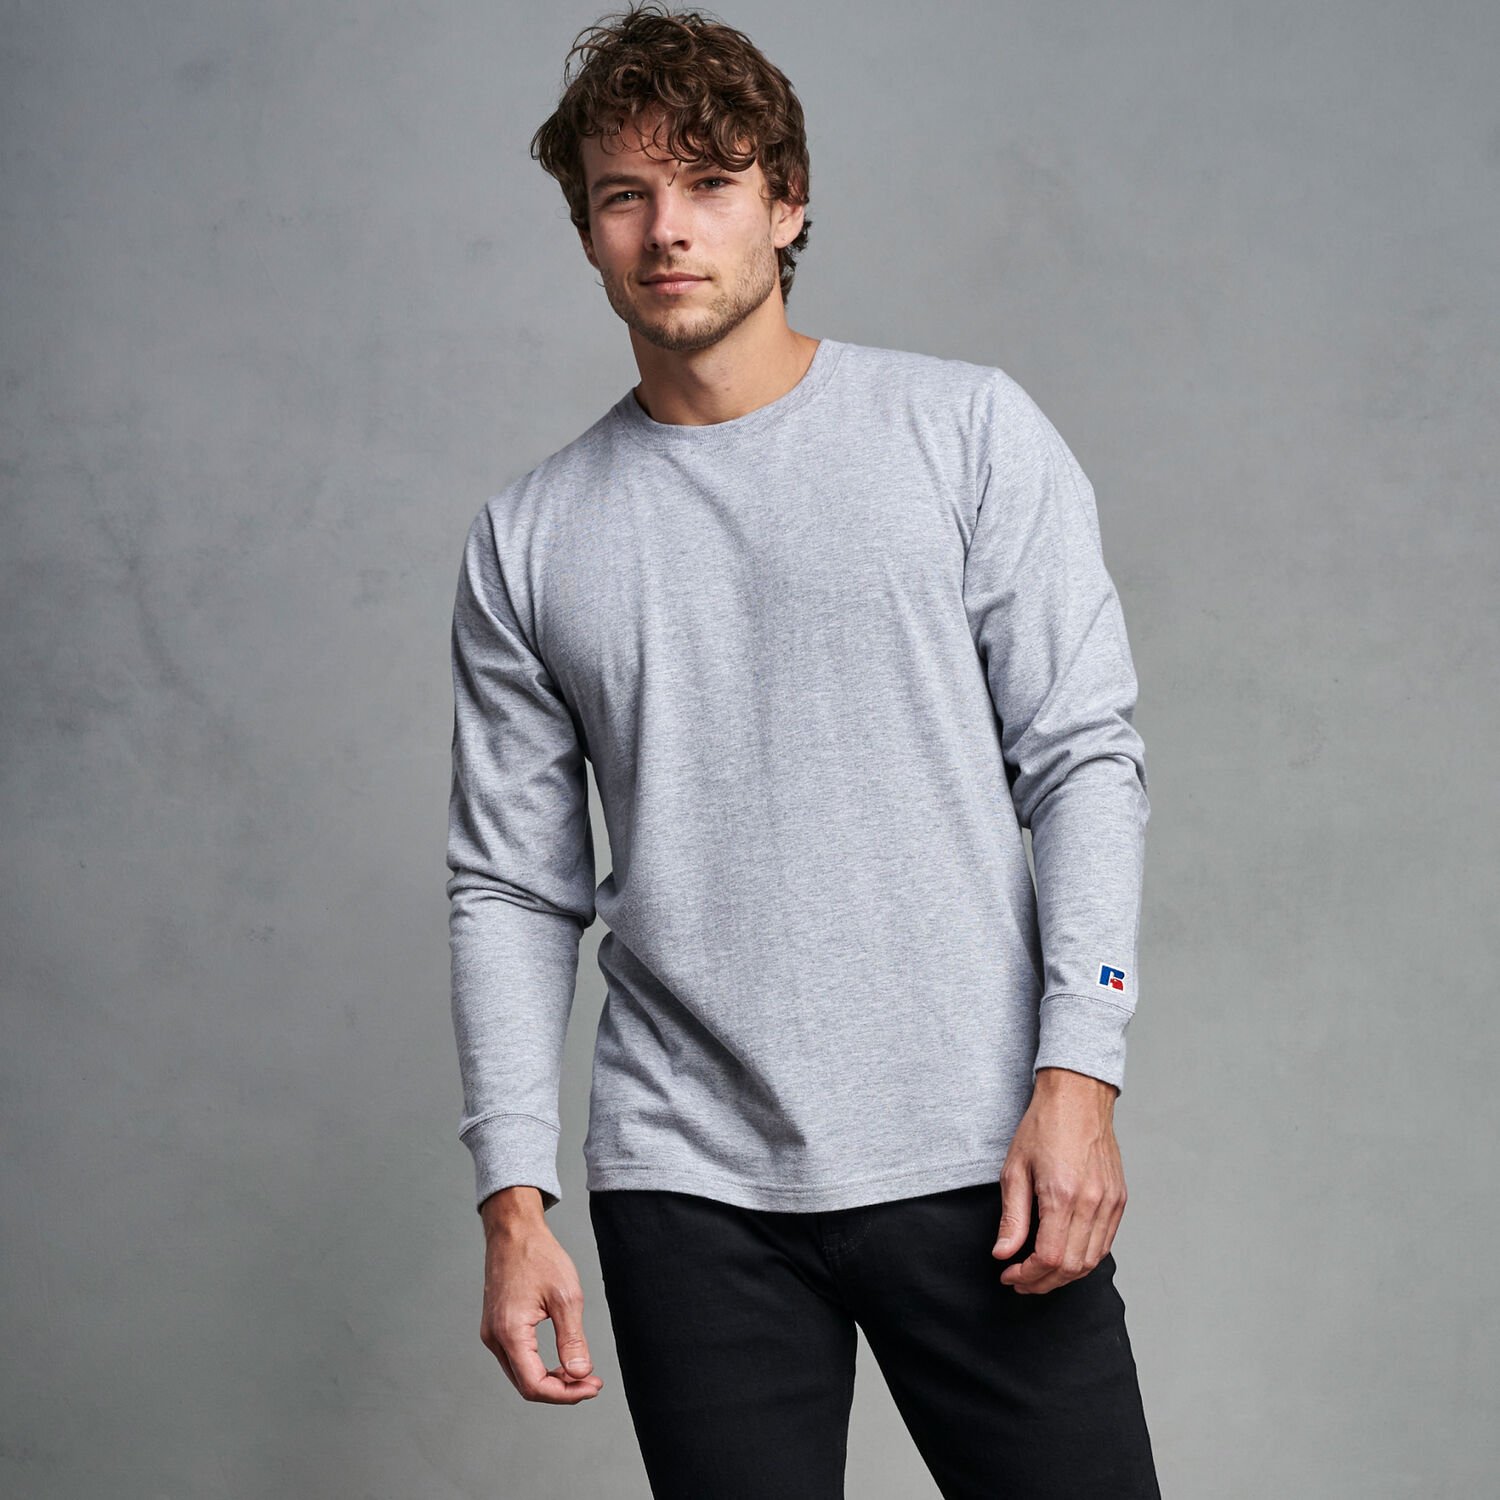 Men's Premium Cotton Classic Long Sleeve T-Shirt | Russell Athletic